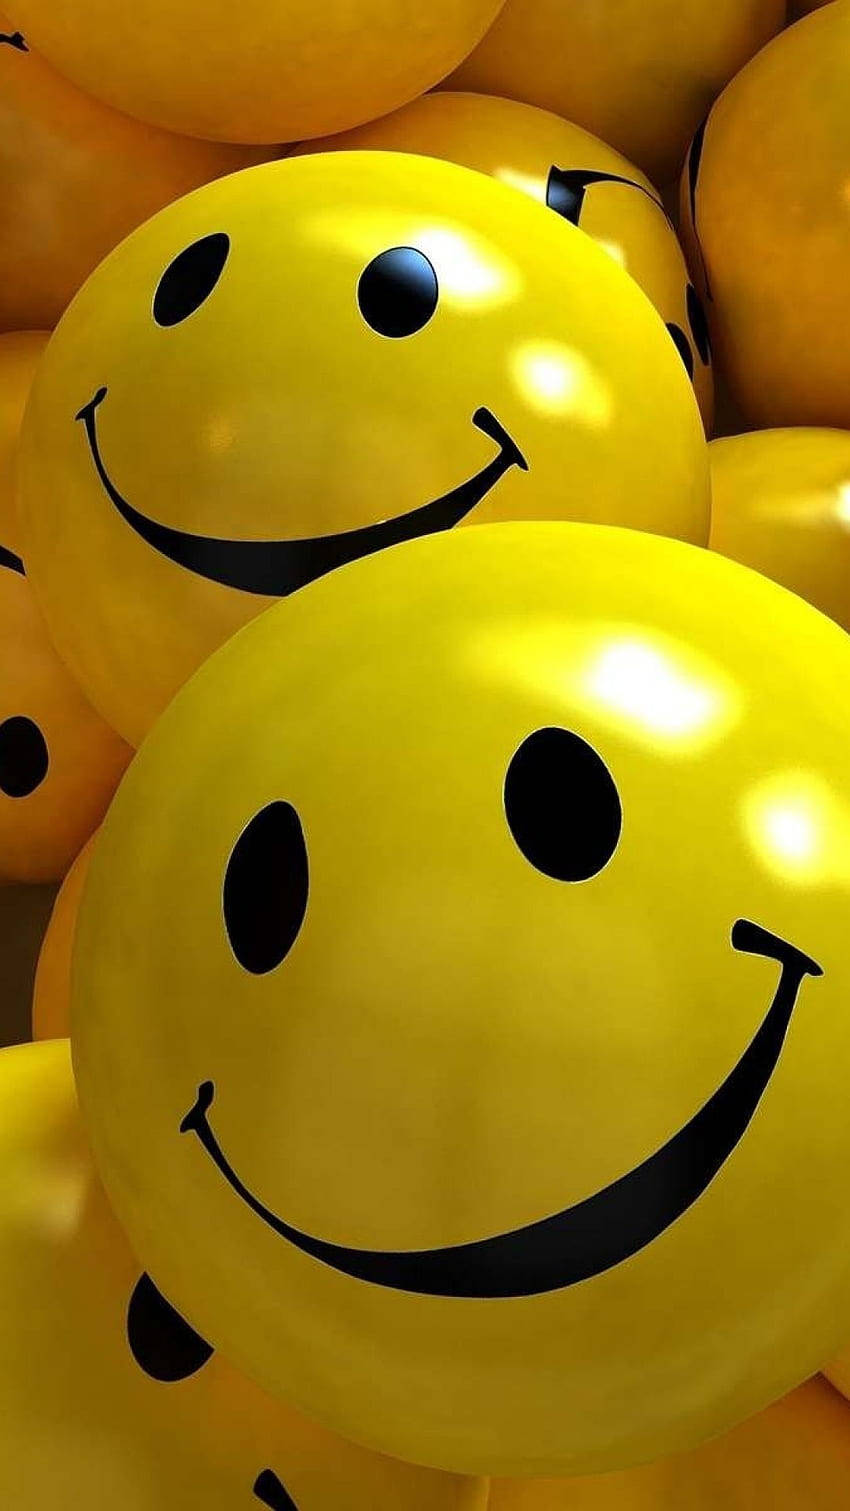 Cute 3d Phone Yellow Smiley Faces Wallpaper